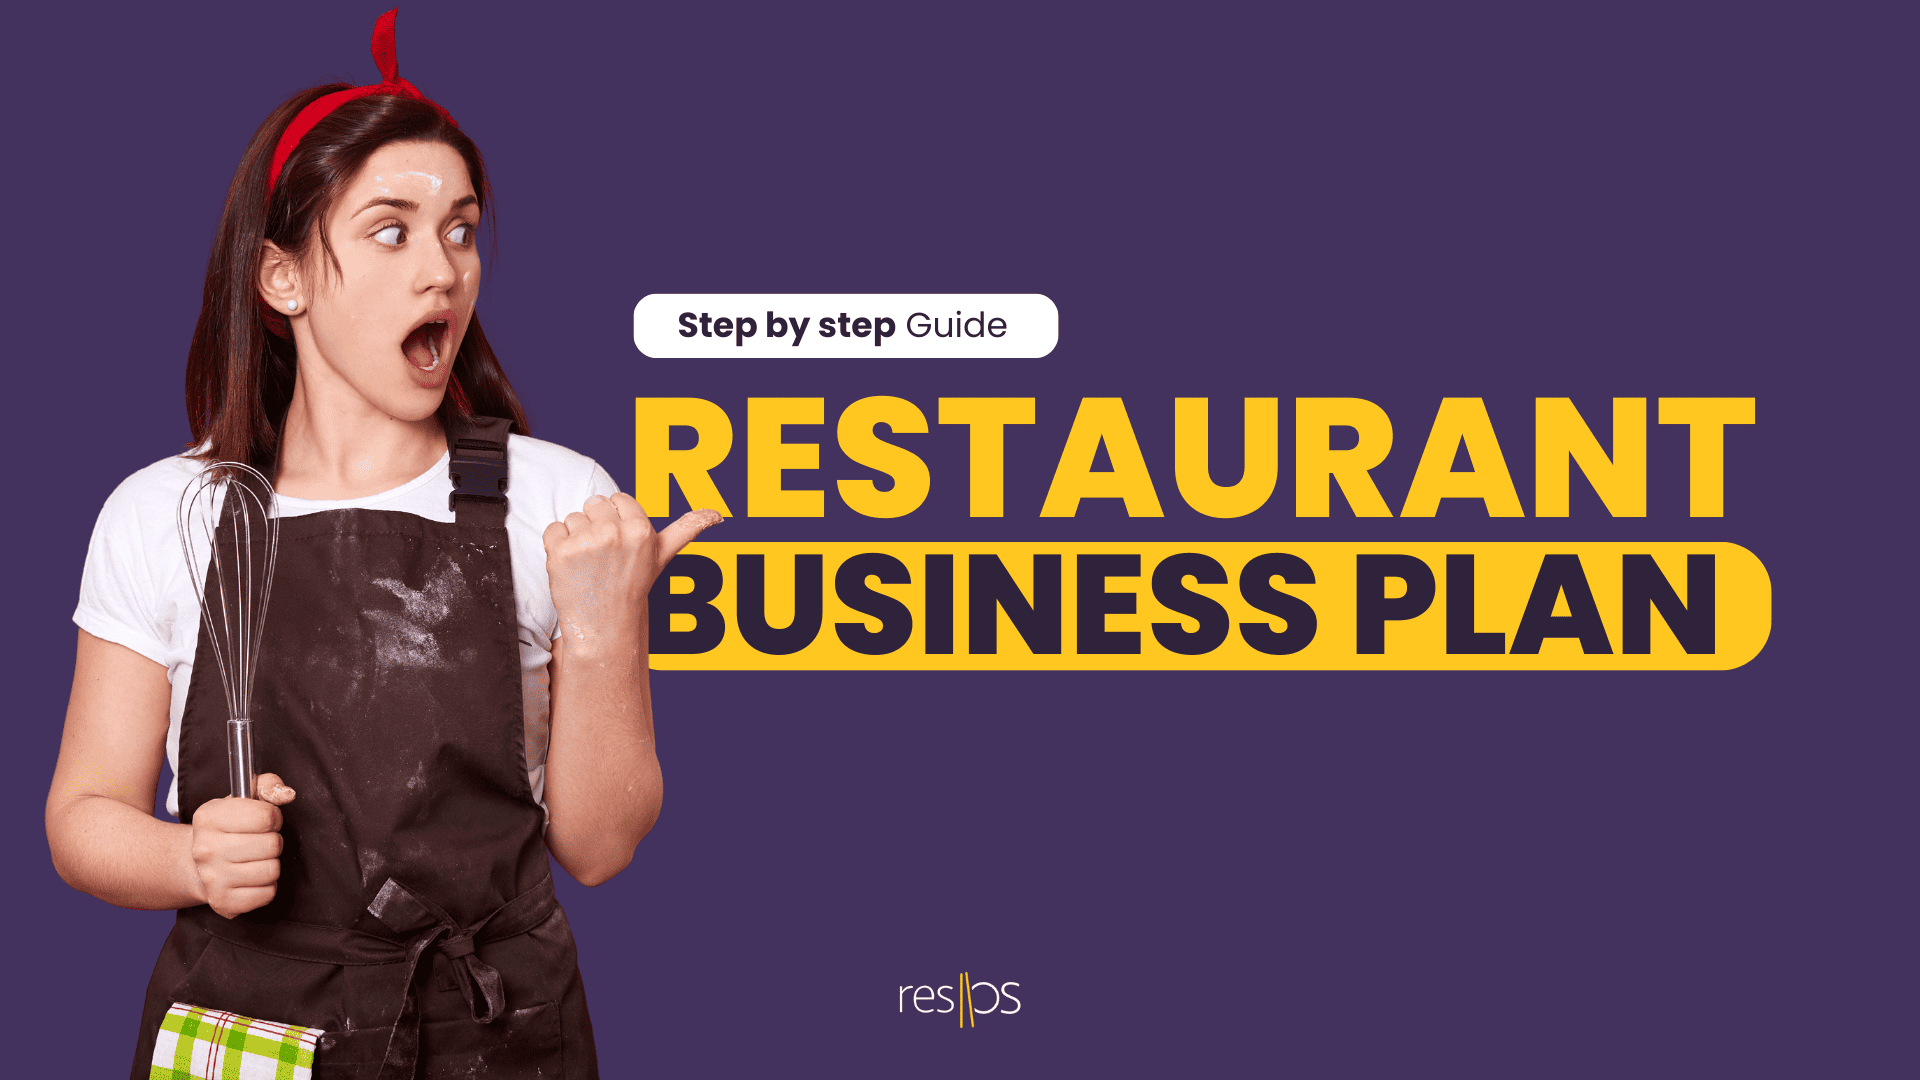 Restaurant business plan: step-by-step guide + examples